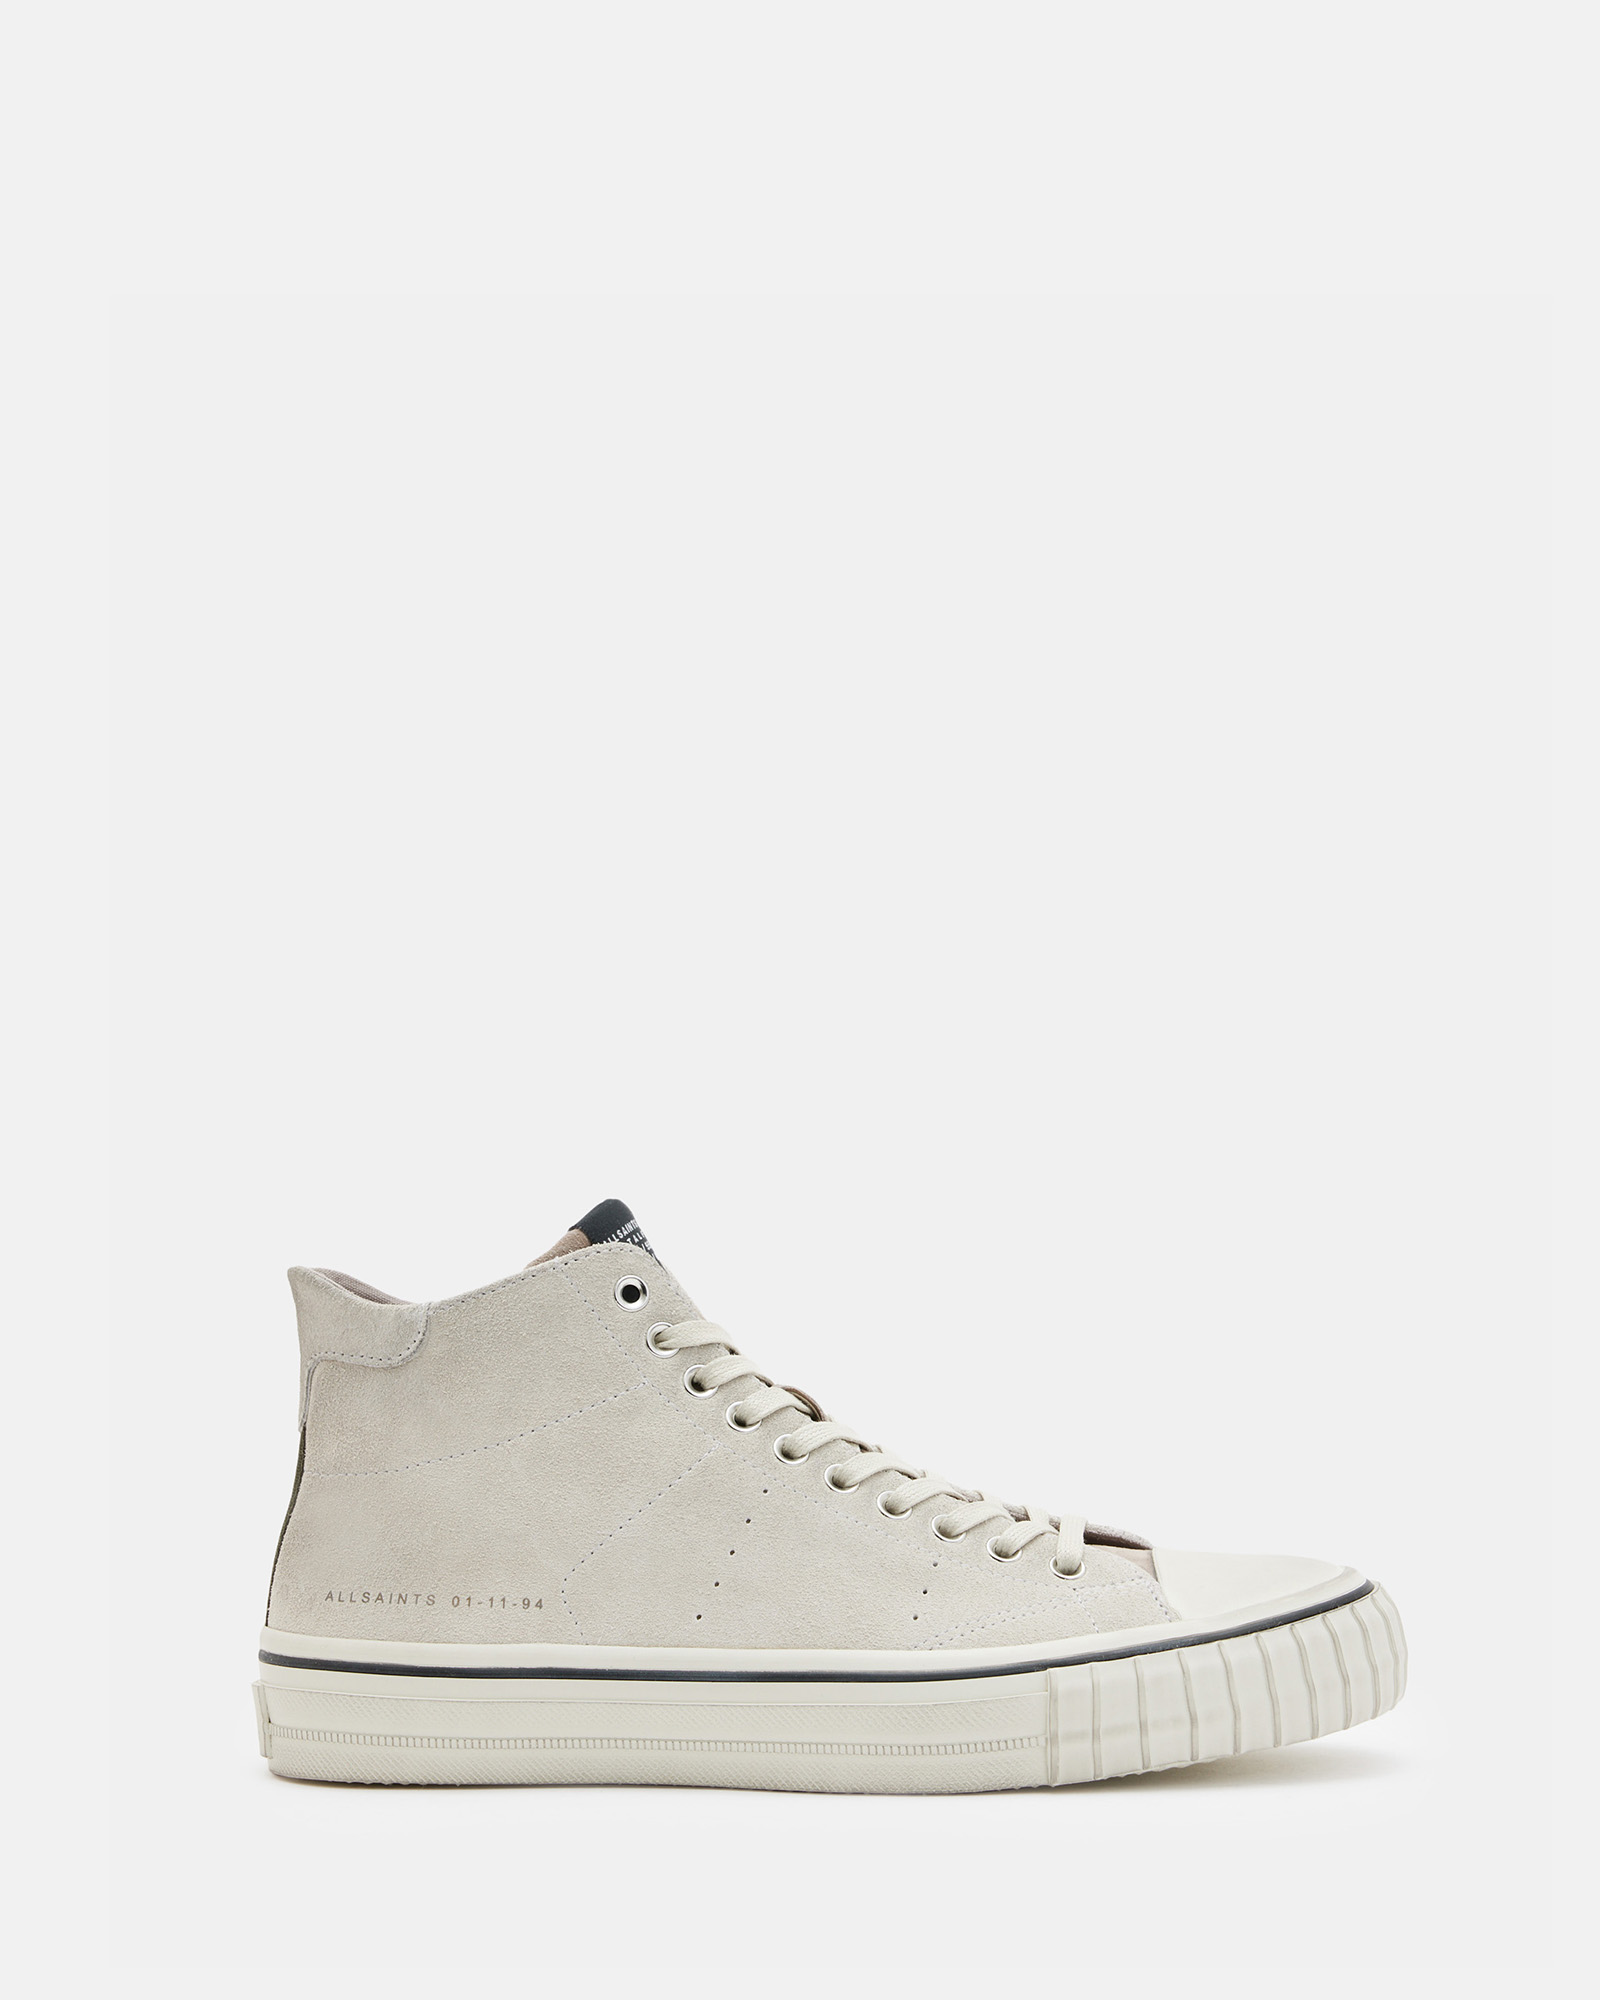 AllSaints Lewis Lace Up Leather High Top Trainers,, Chalk White